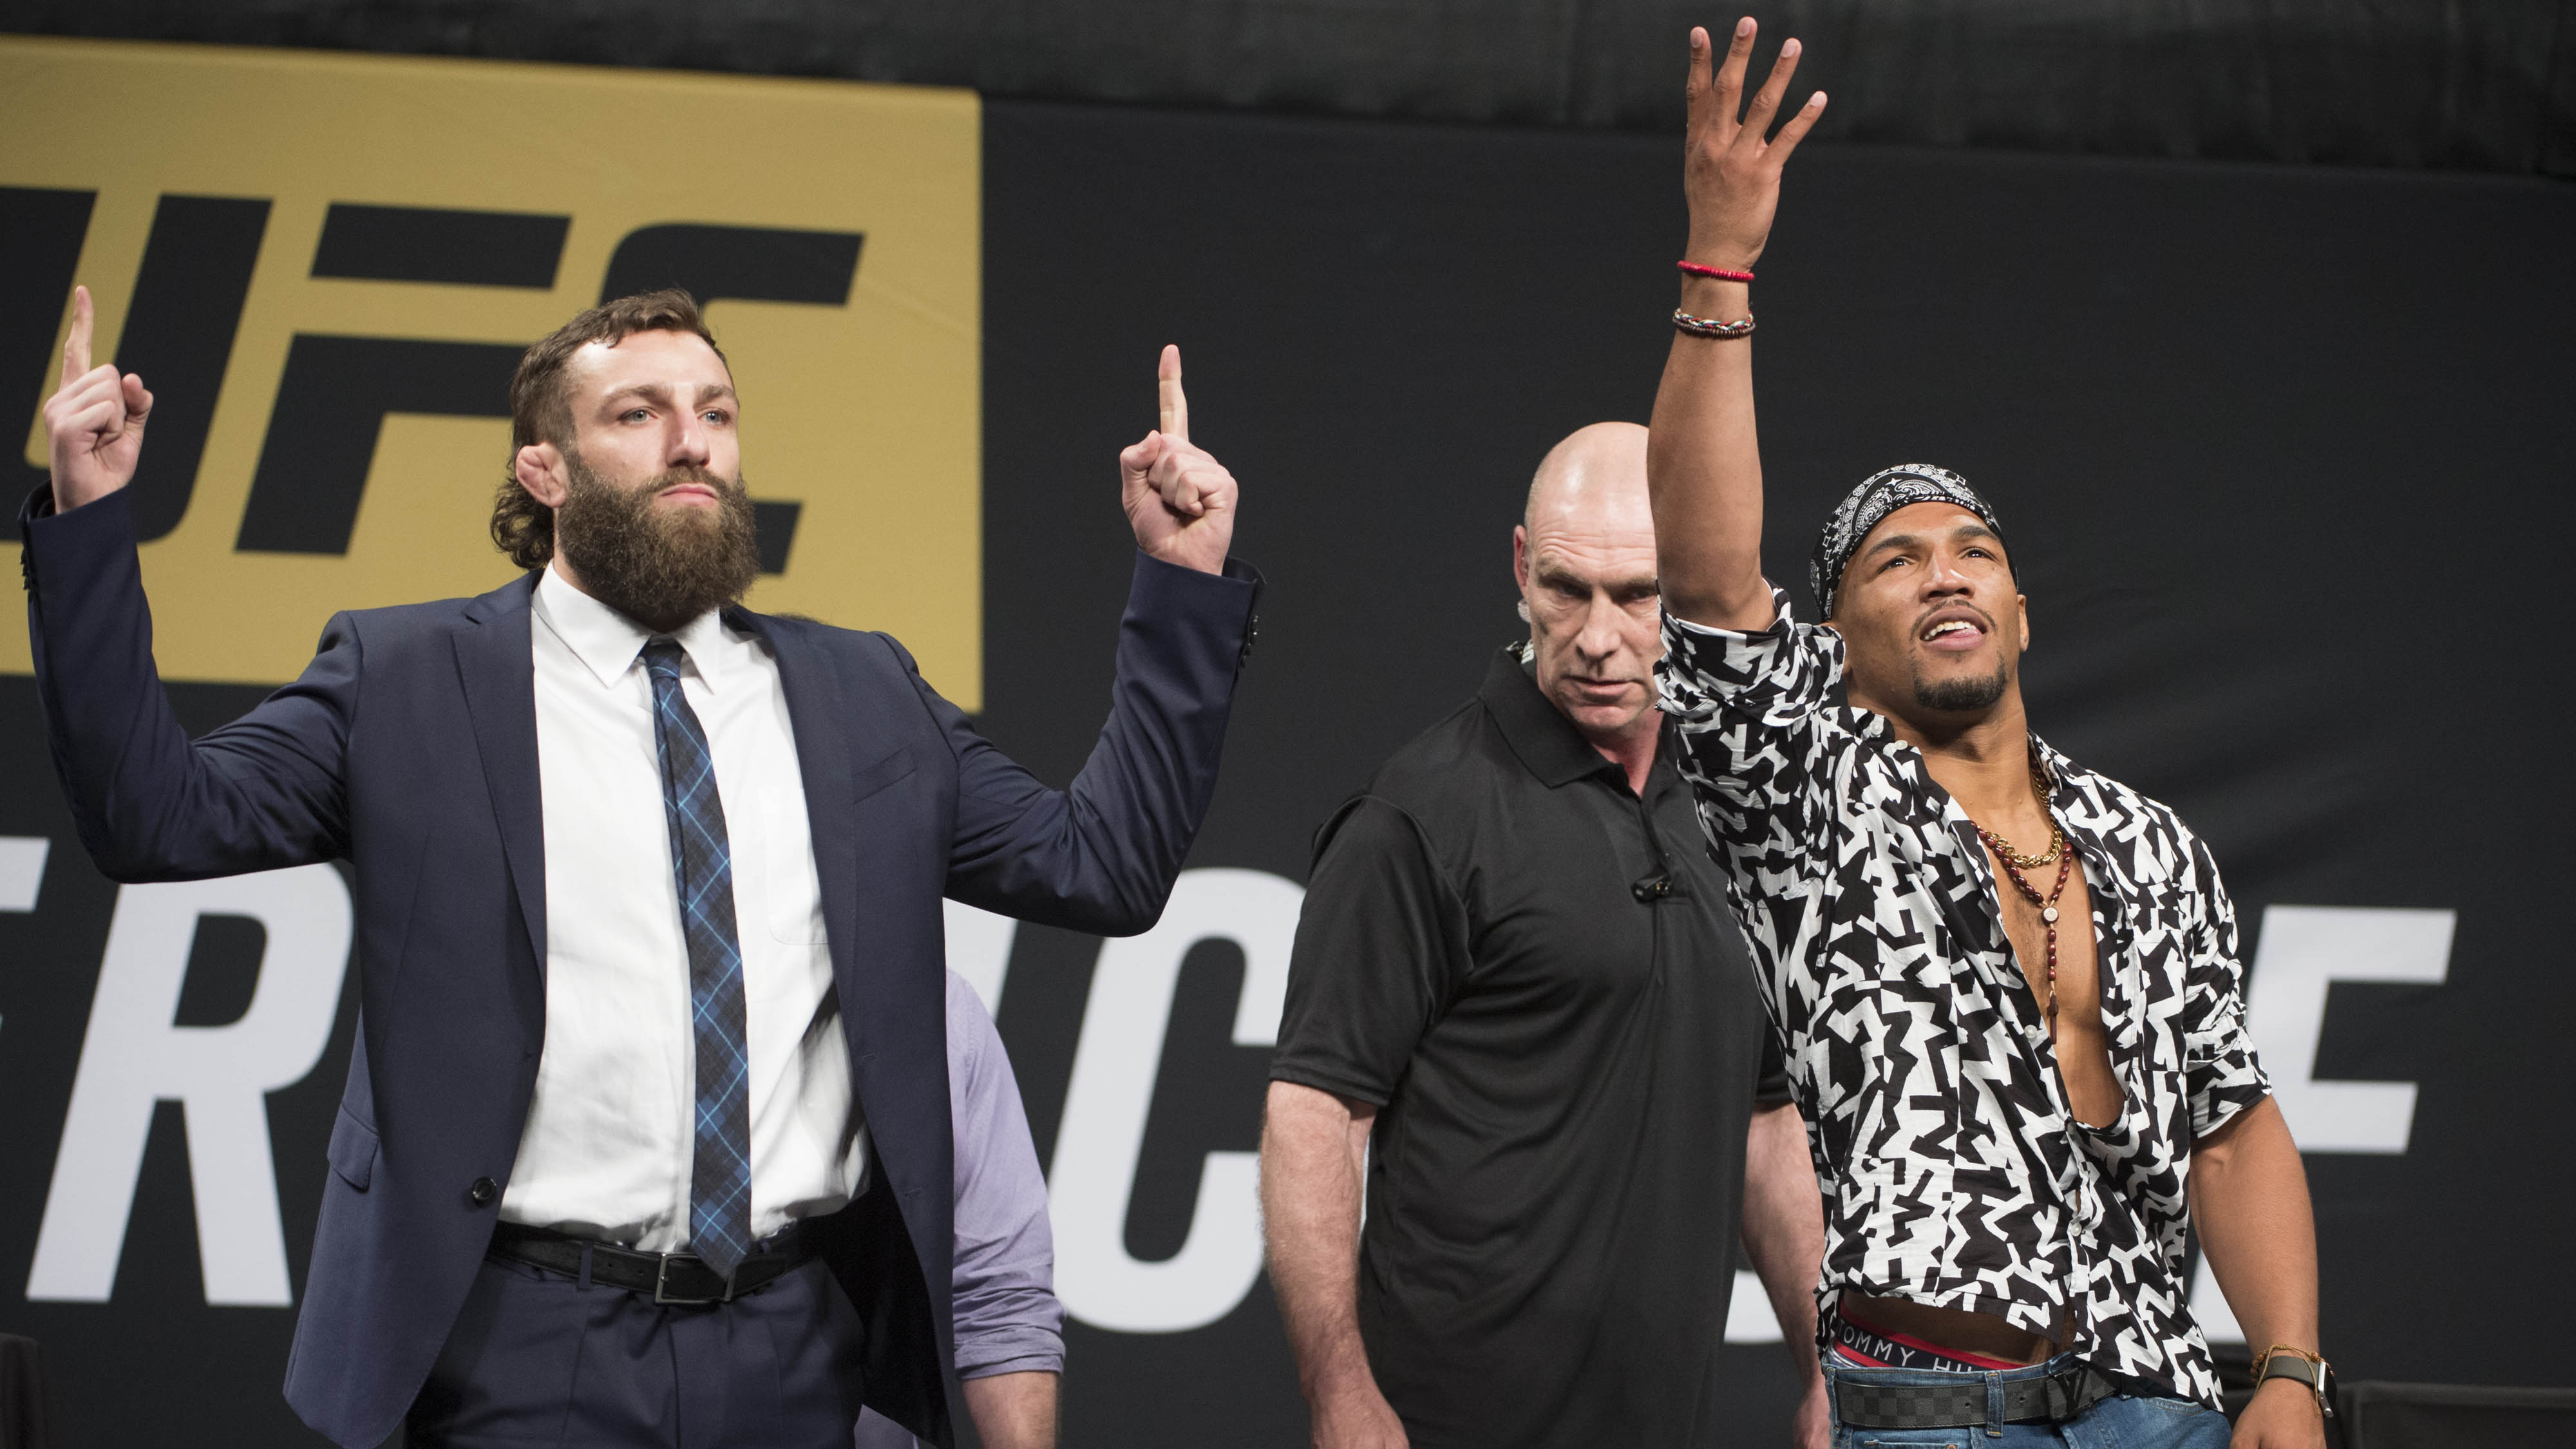 DALLAS, TX - MAY 12: Michael Chiesa faces off with Kevin Lee during the UFC Summer Kickoff Press Conference at the American Airlines Center on May 12, 2017 in Dallas, Texas. (Photo by Cooper Neill/Zuffa LLC/Zuffa LLC via Getty Images)